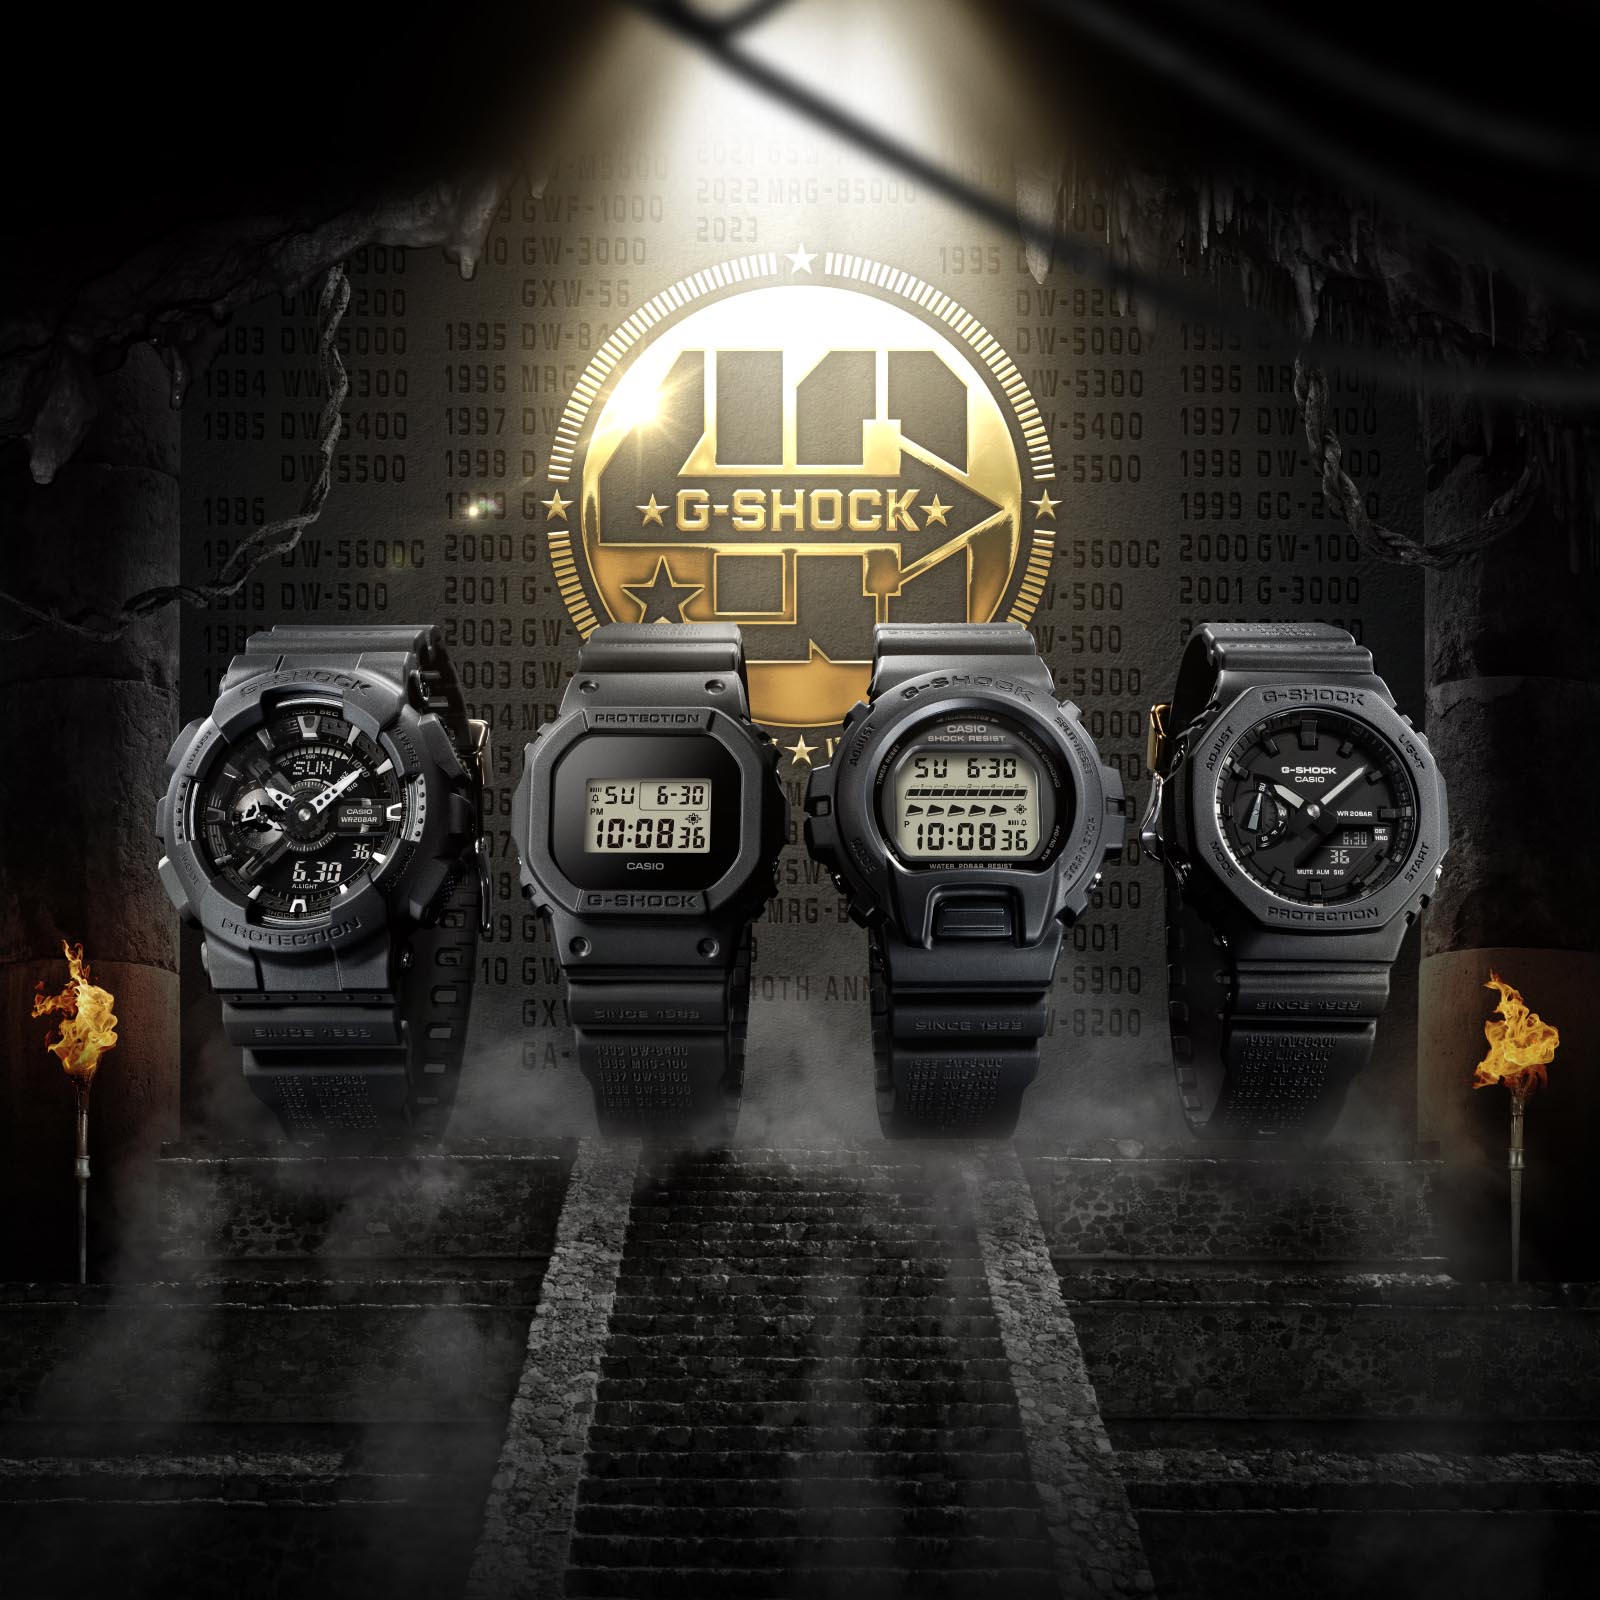 CASIO G-SHOCK - Carbon x G-SHOCK debut! The GA-2000 is